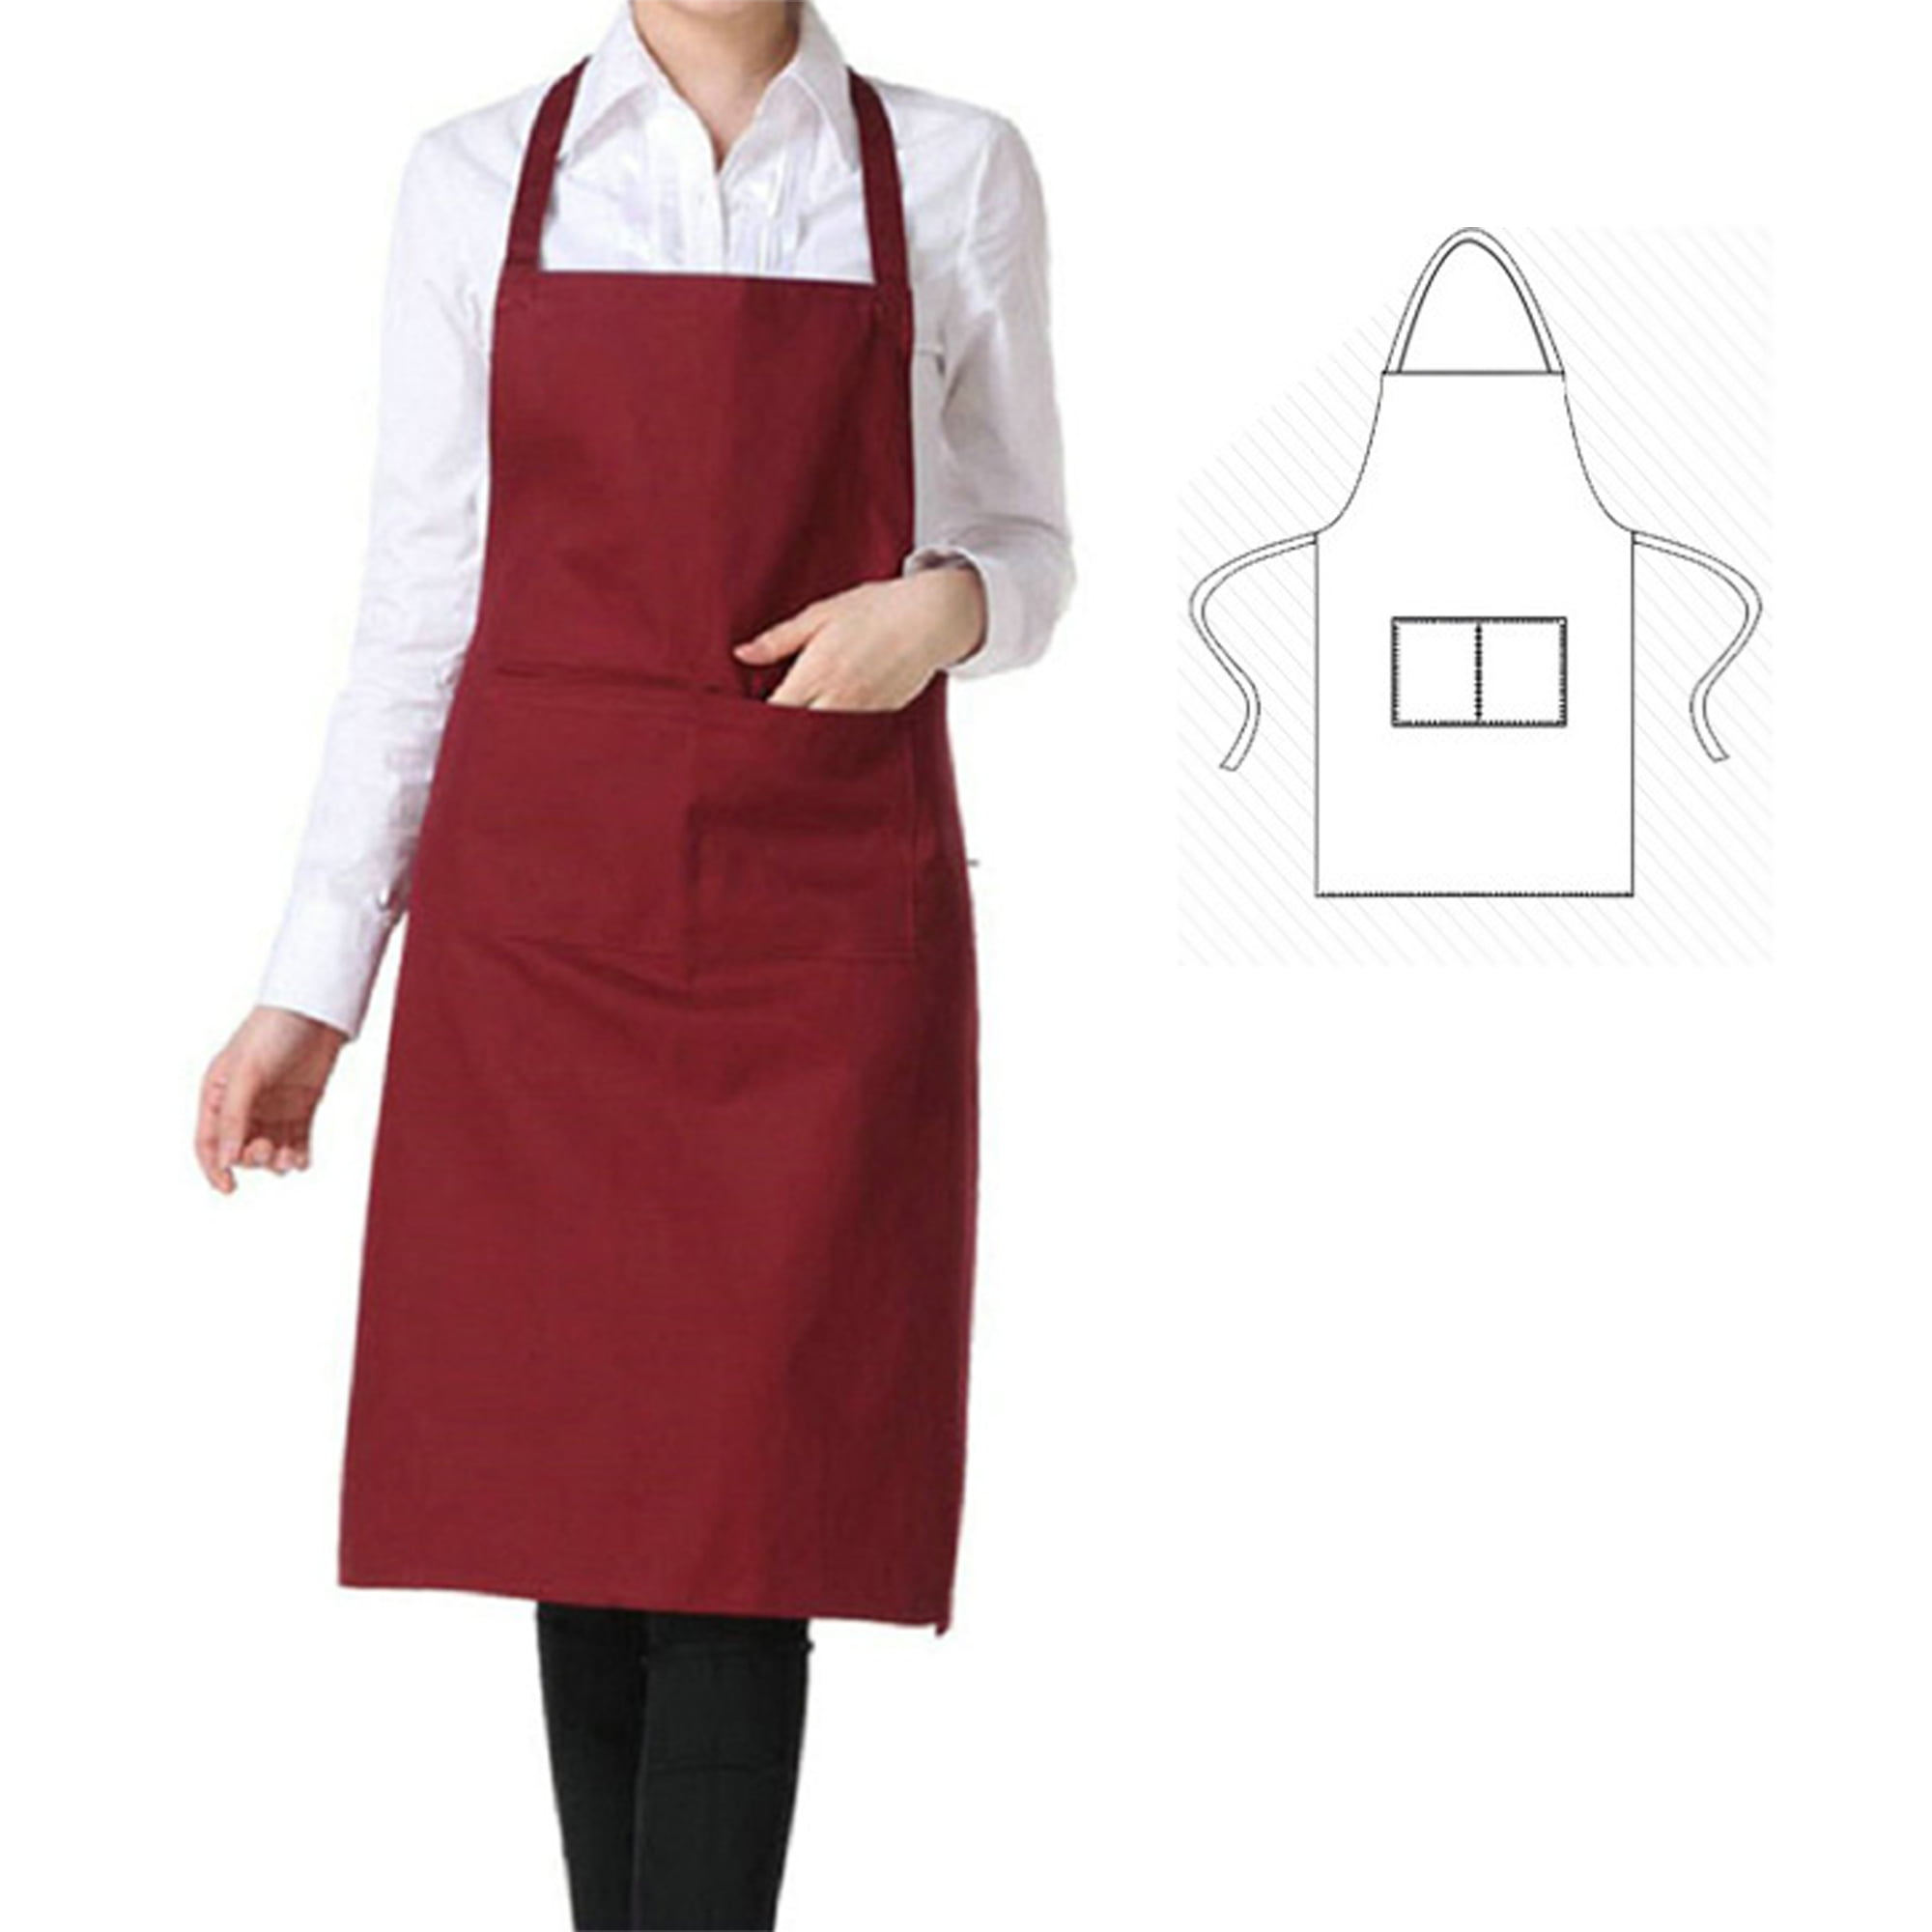 Chic Tabard Apron Lightweight Care Catering Sleeveless Workwear With Pockets 